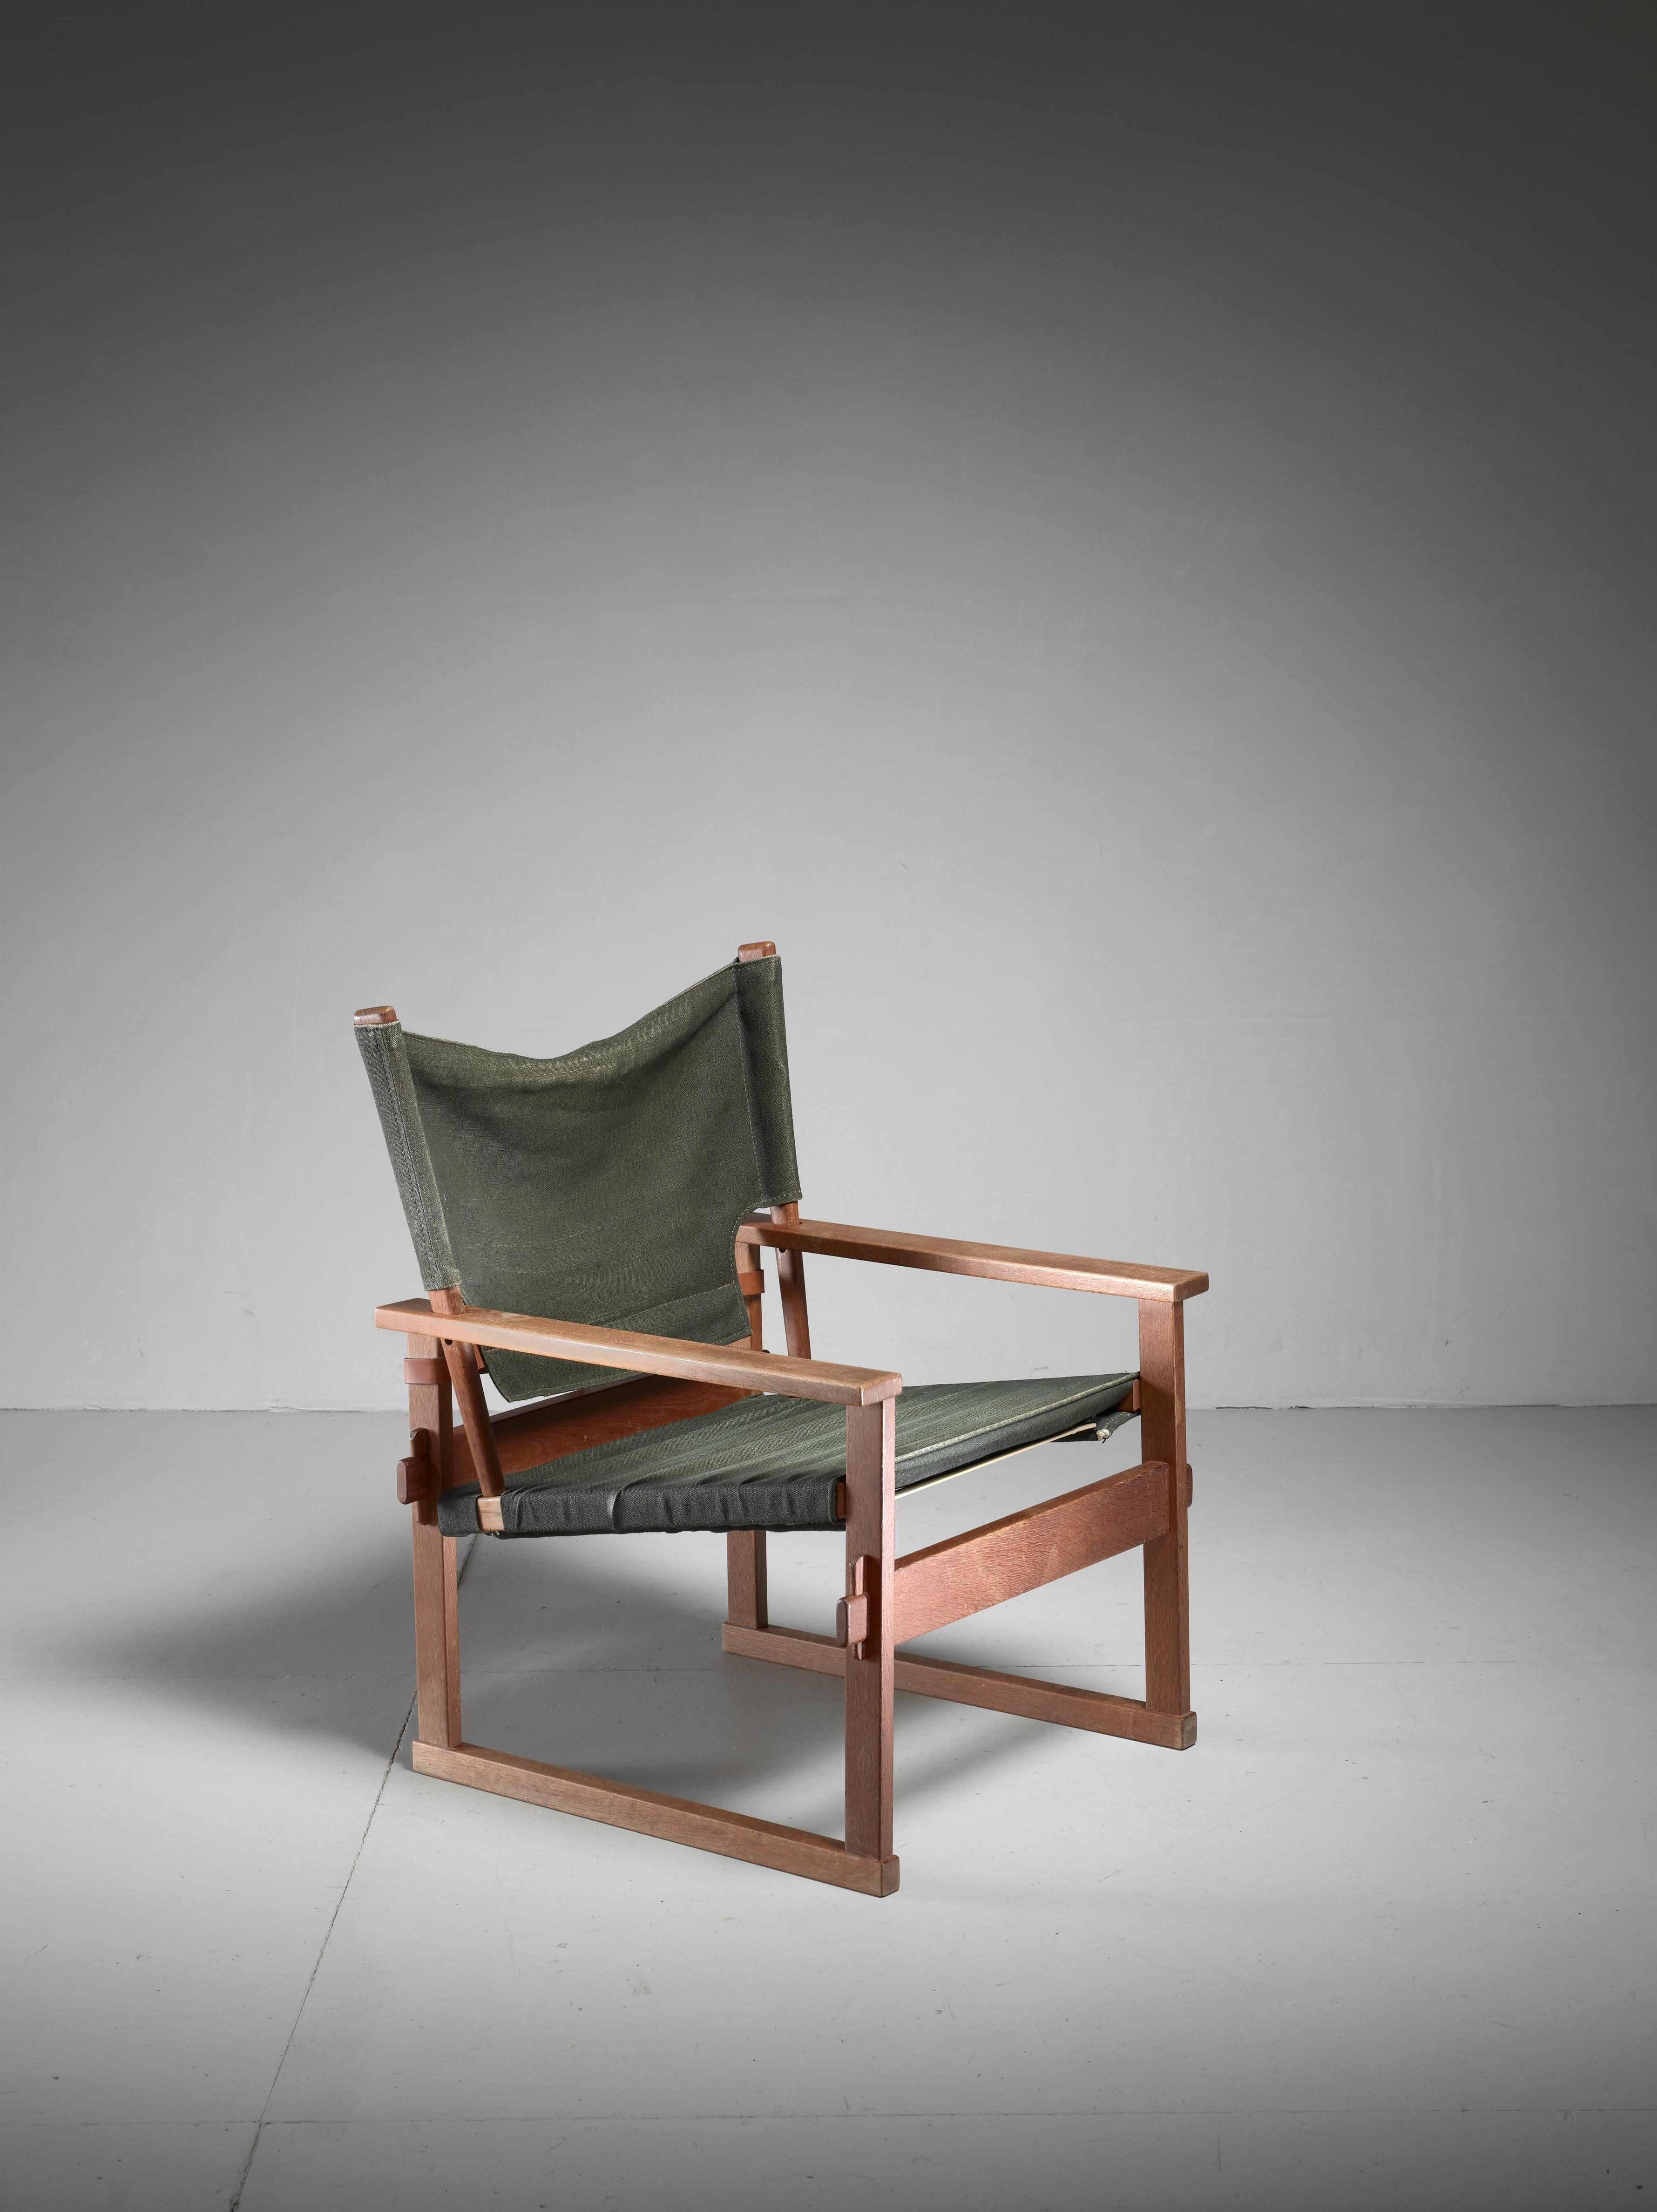 A 'model 60' armchair in oak with a green canvas seat and backrest. The chair was designed in 1961 and produced by Poul Hundevad, Denmark.
It has a beautiful construction using rubber webbing underneath and a leather belt strap at the back to keep